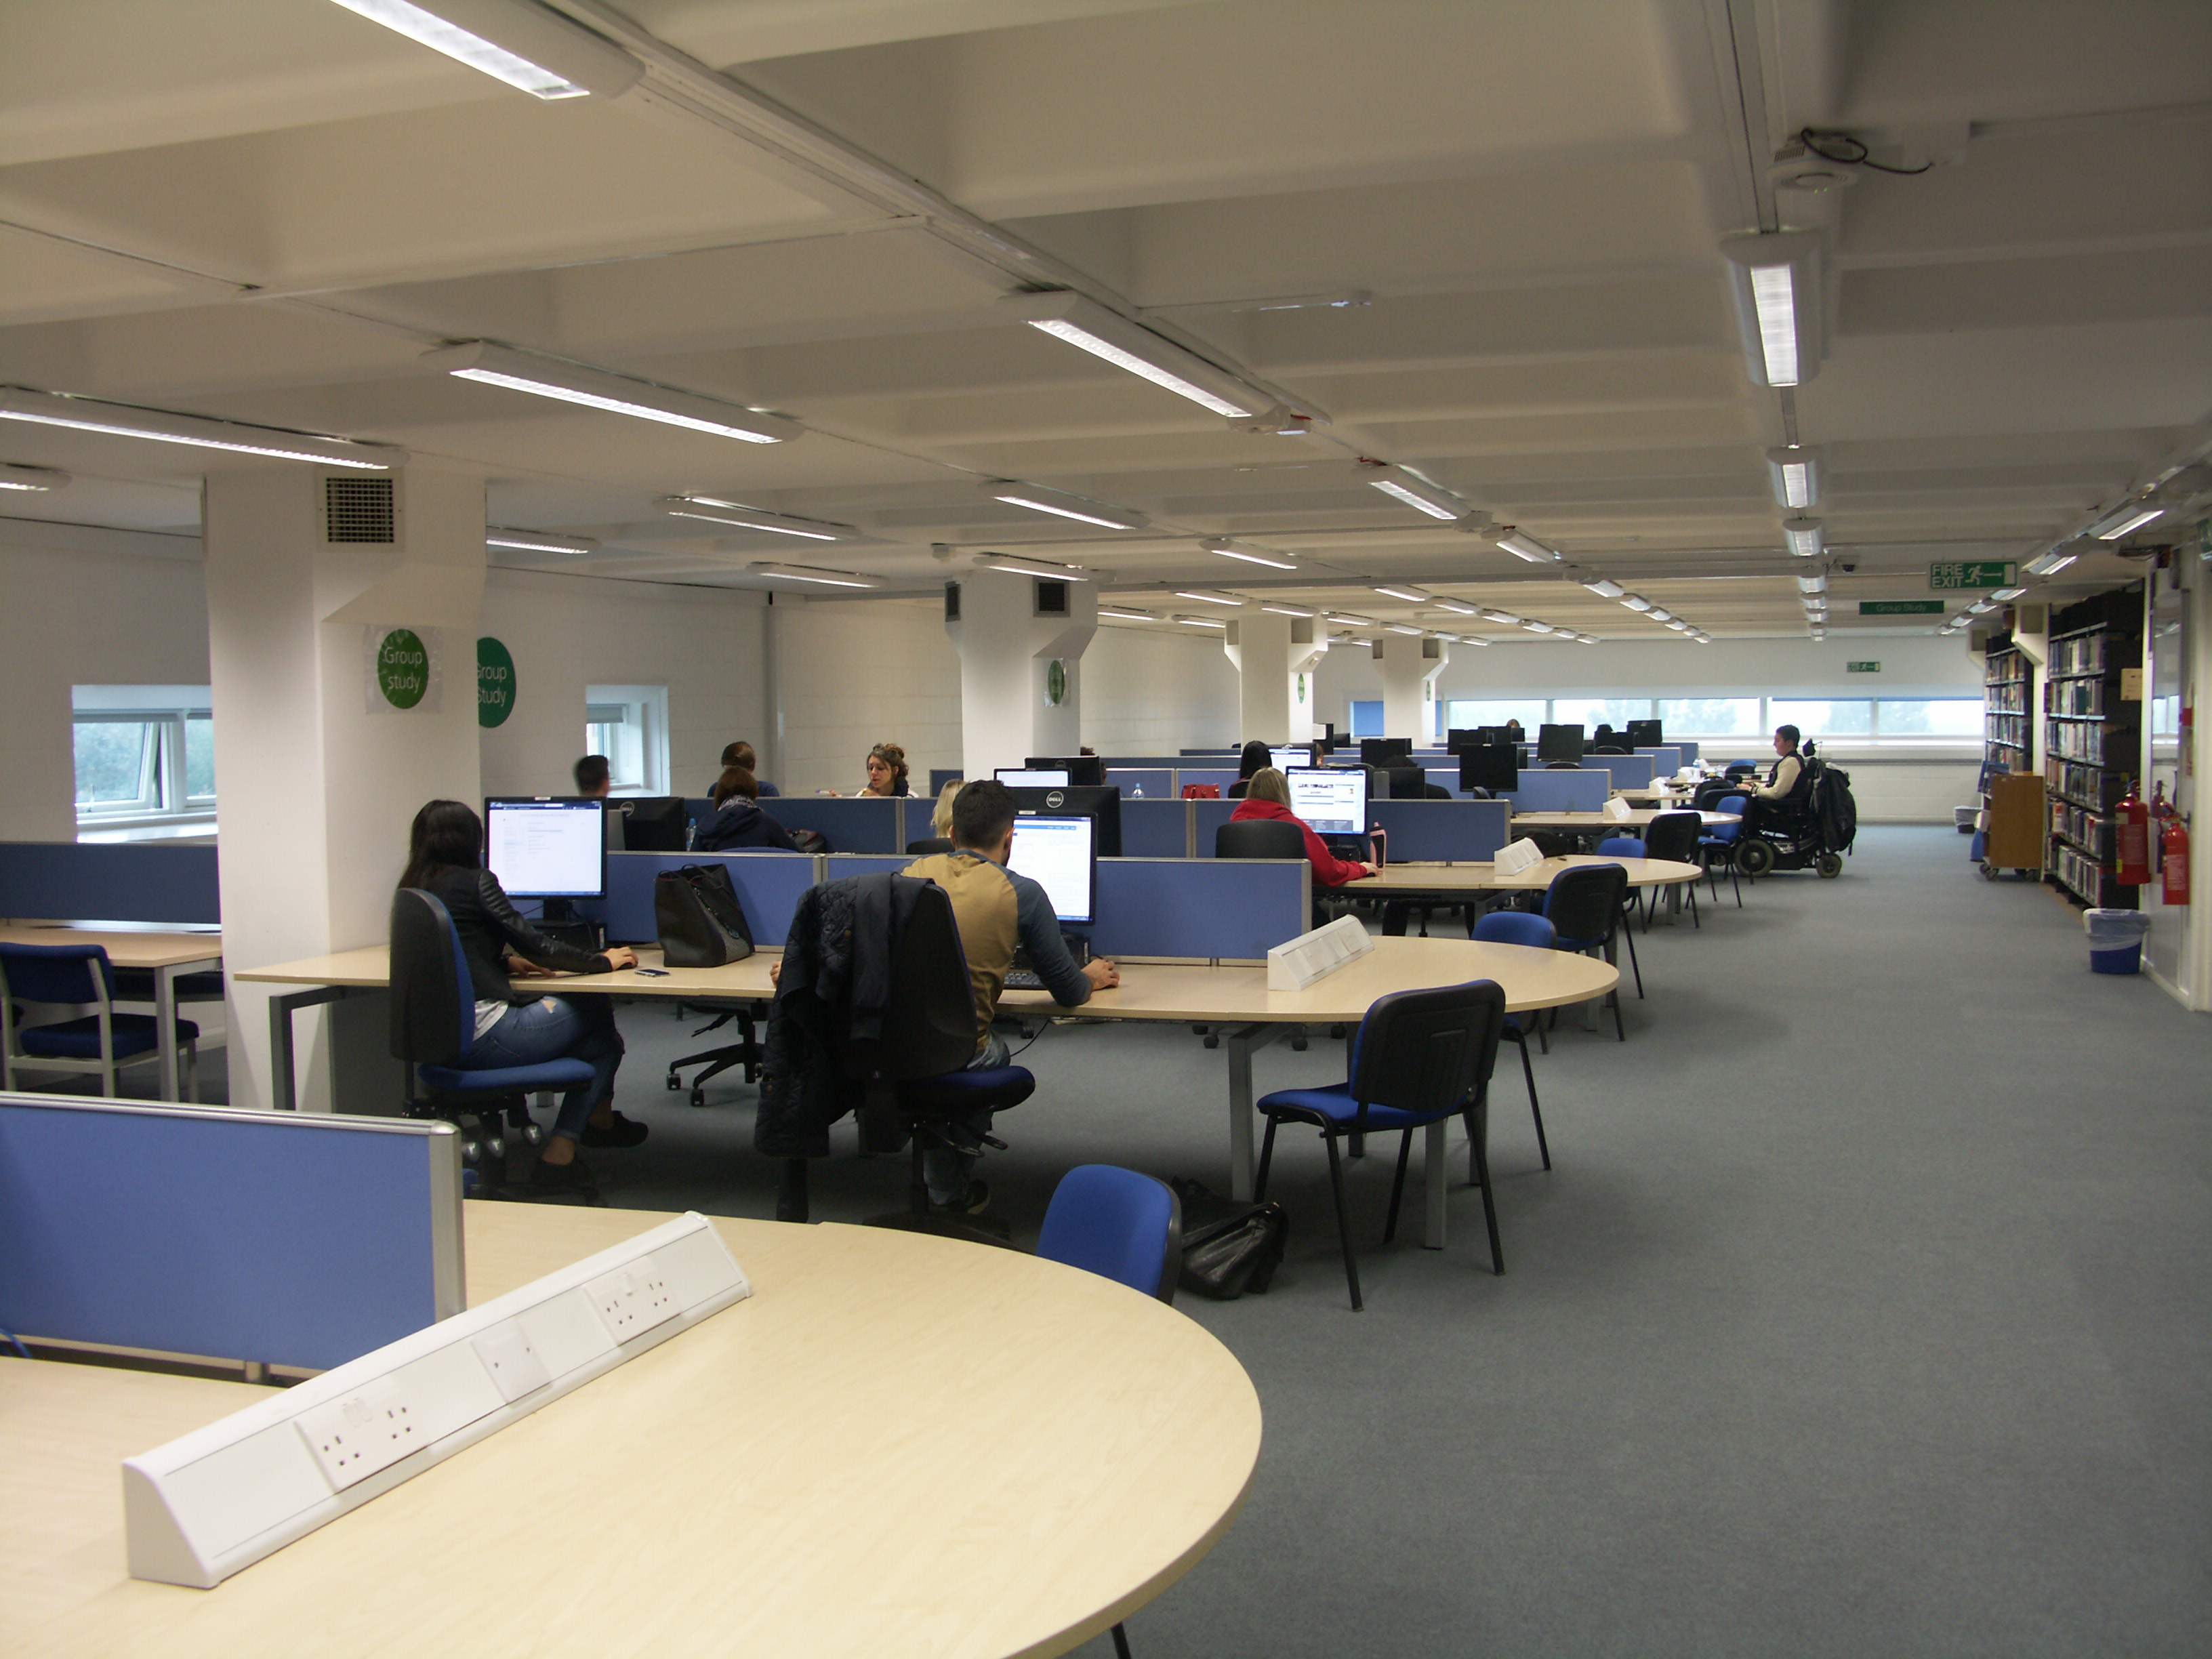 New group study space up on level 4